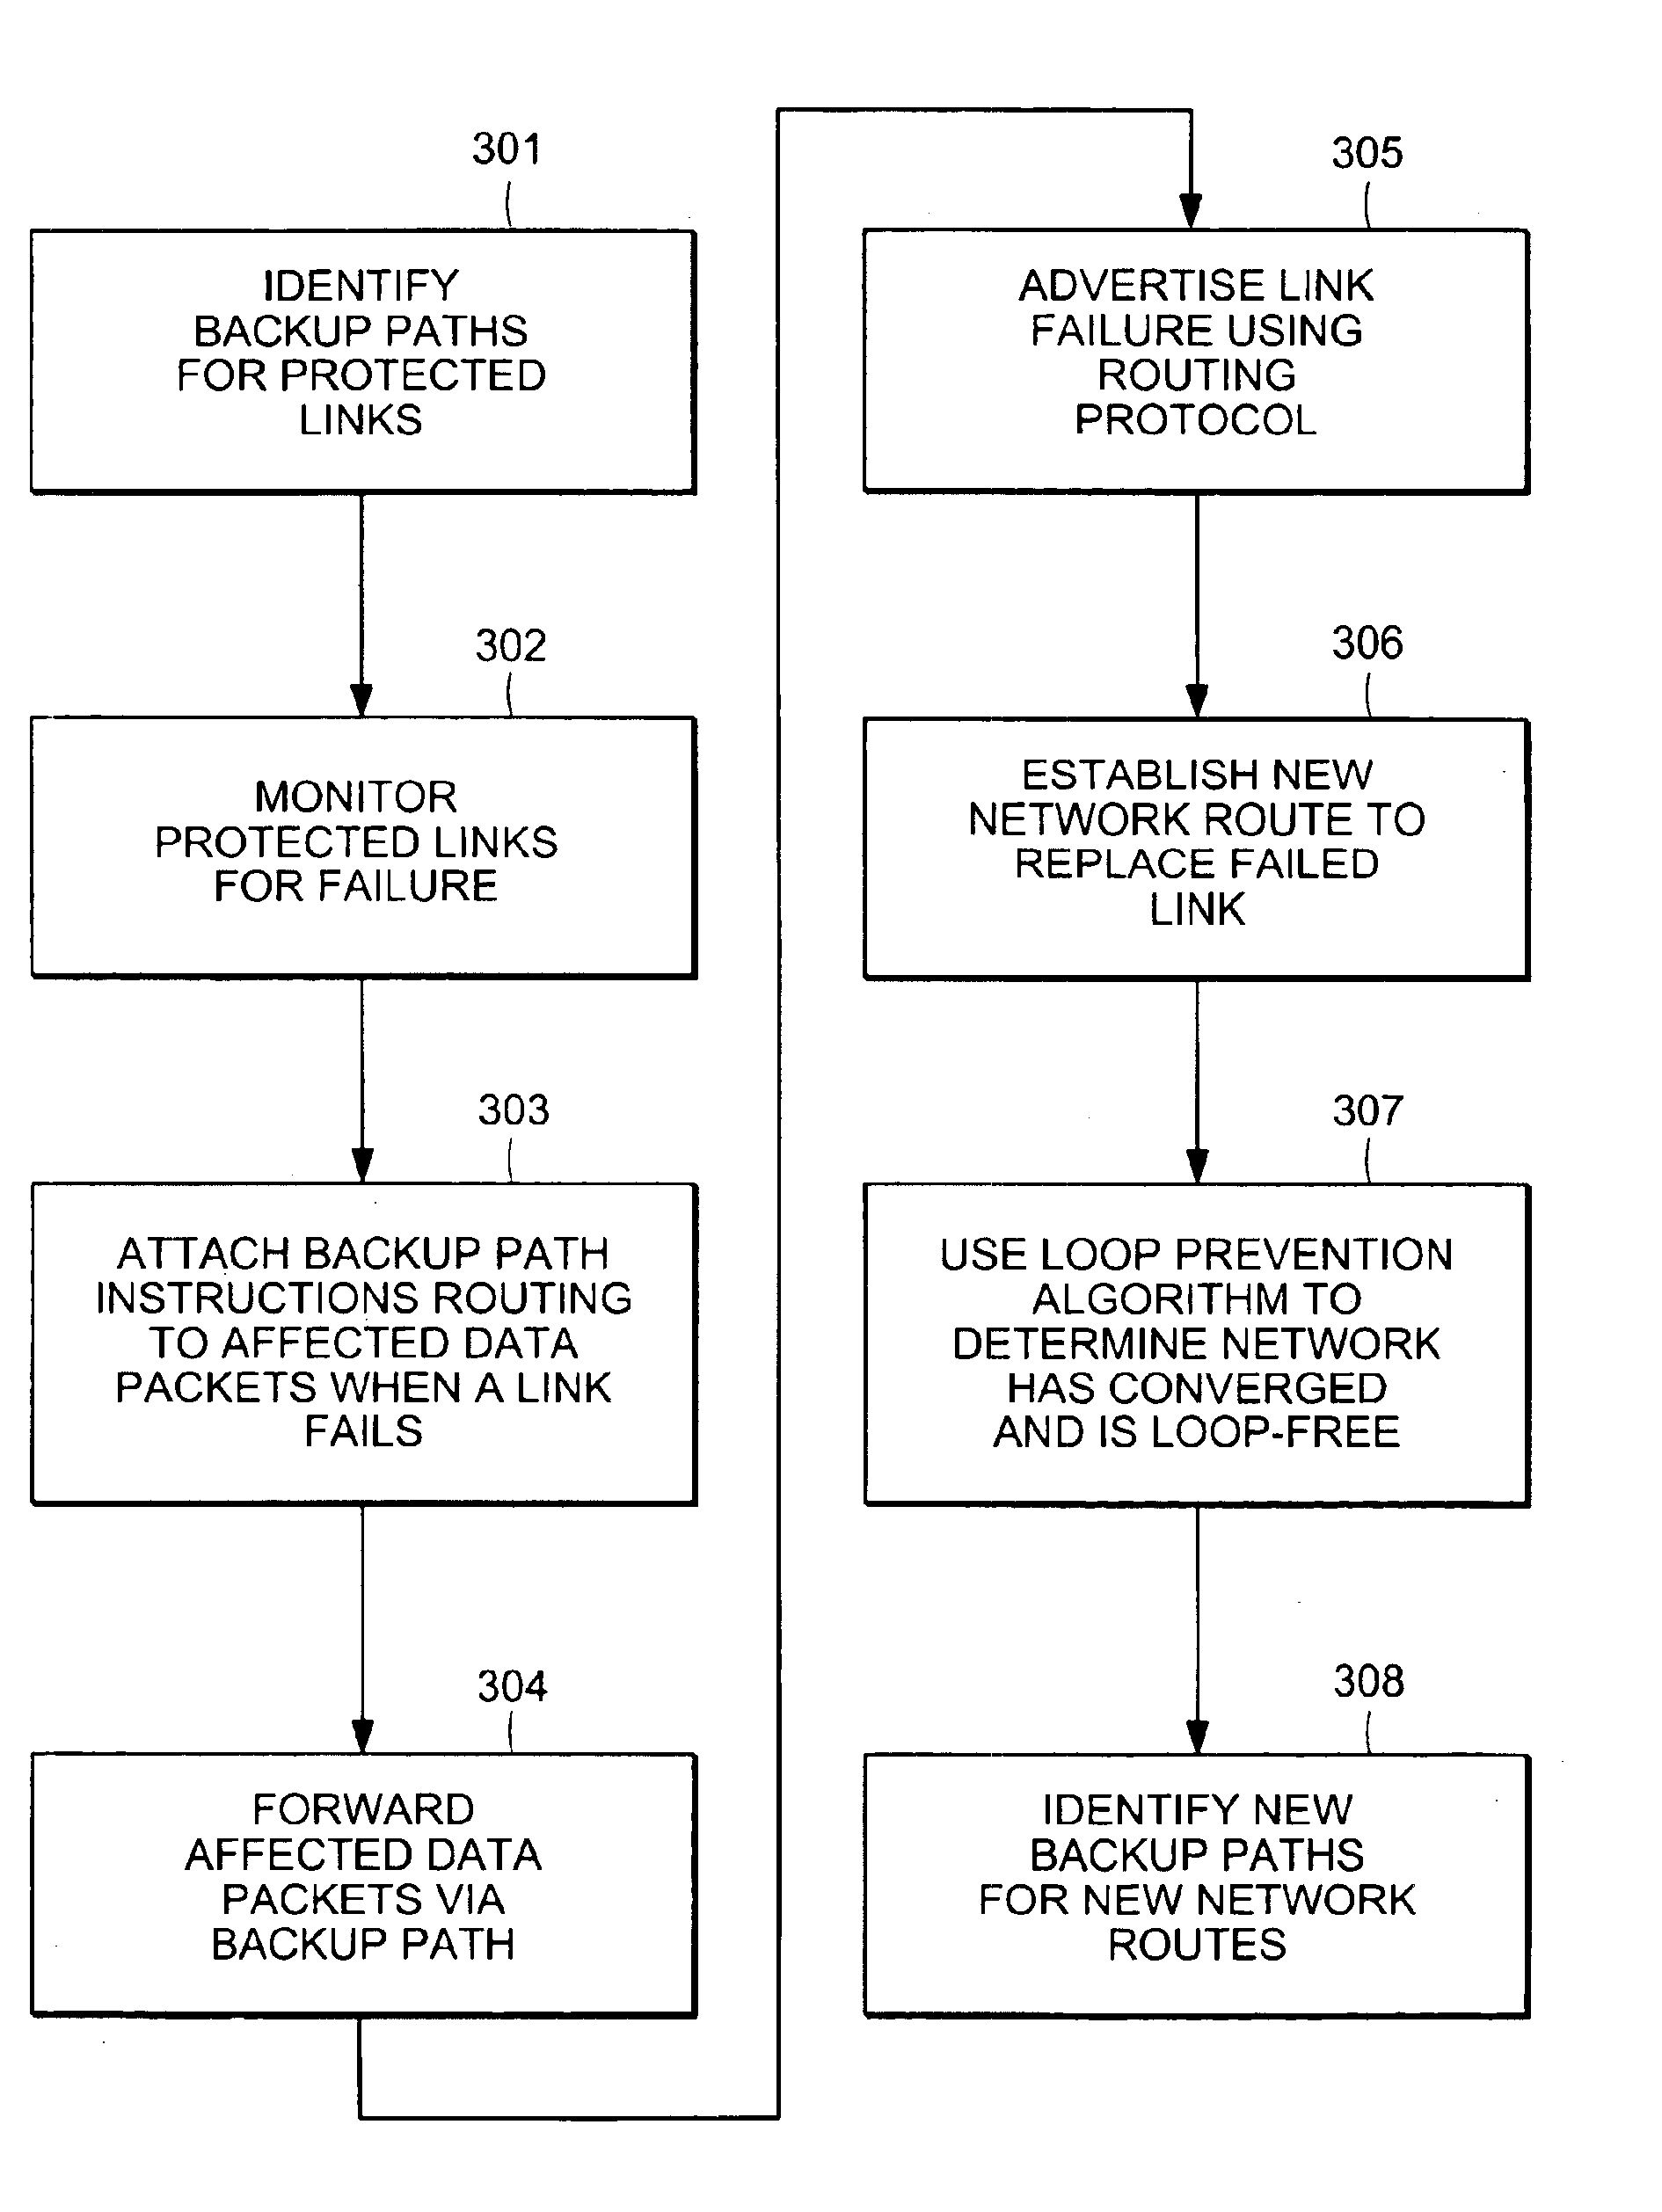 Automatic protection switching using link-level redundancy supporting multi-protocol label switching